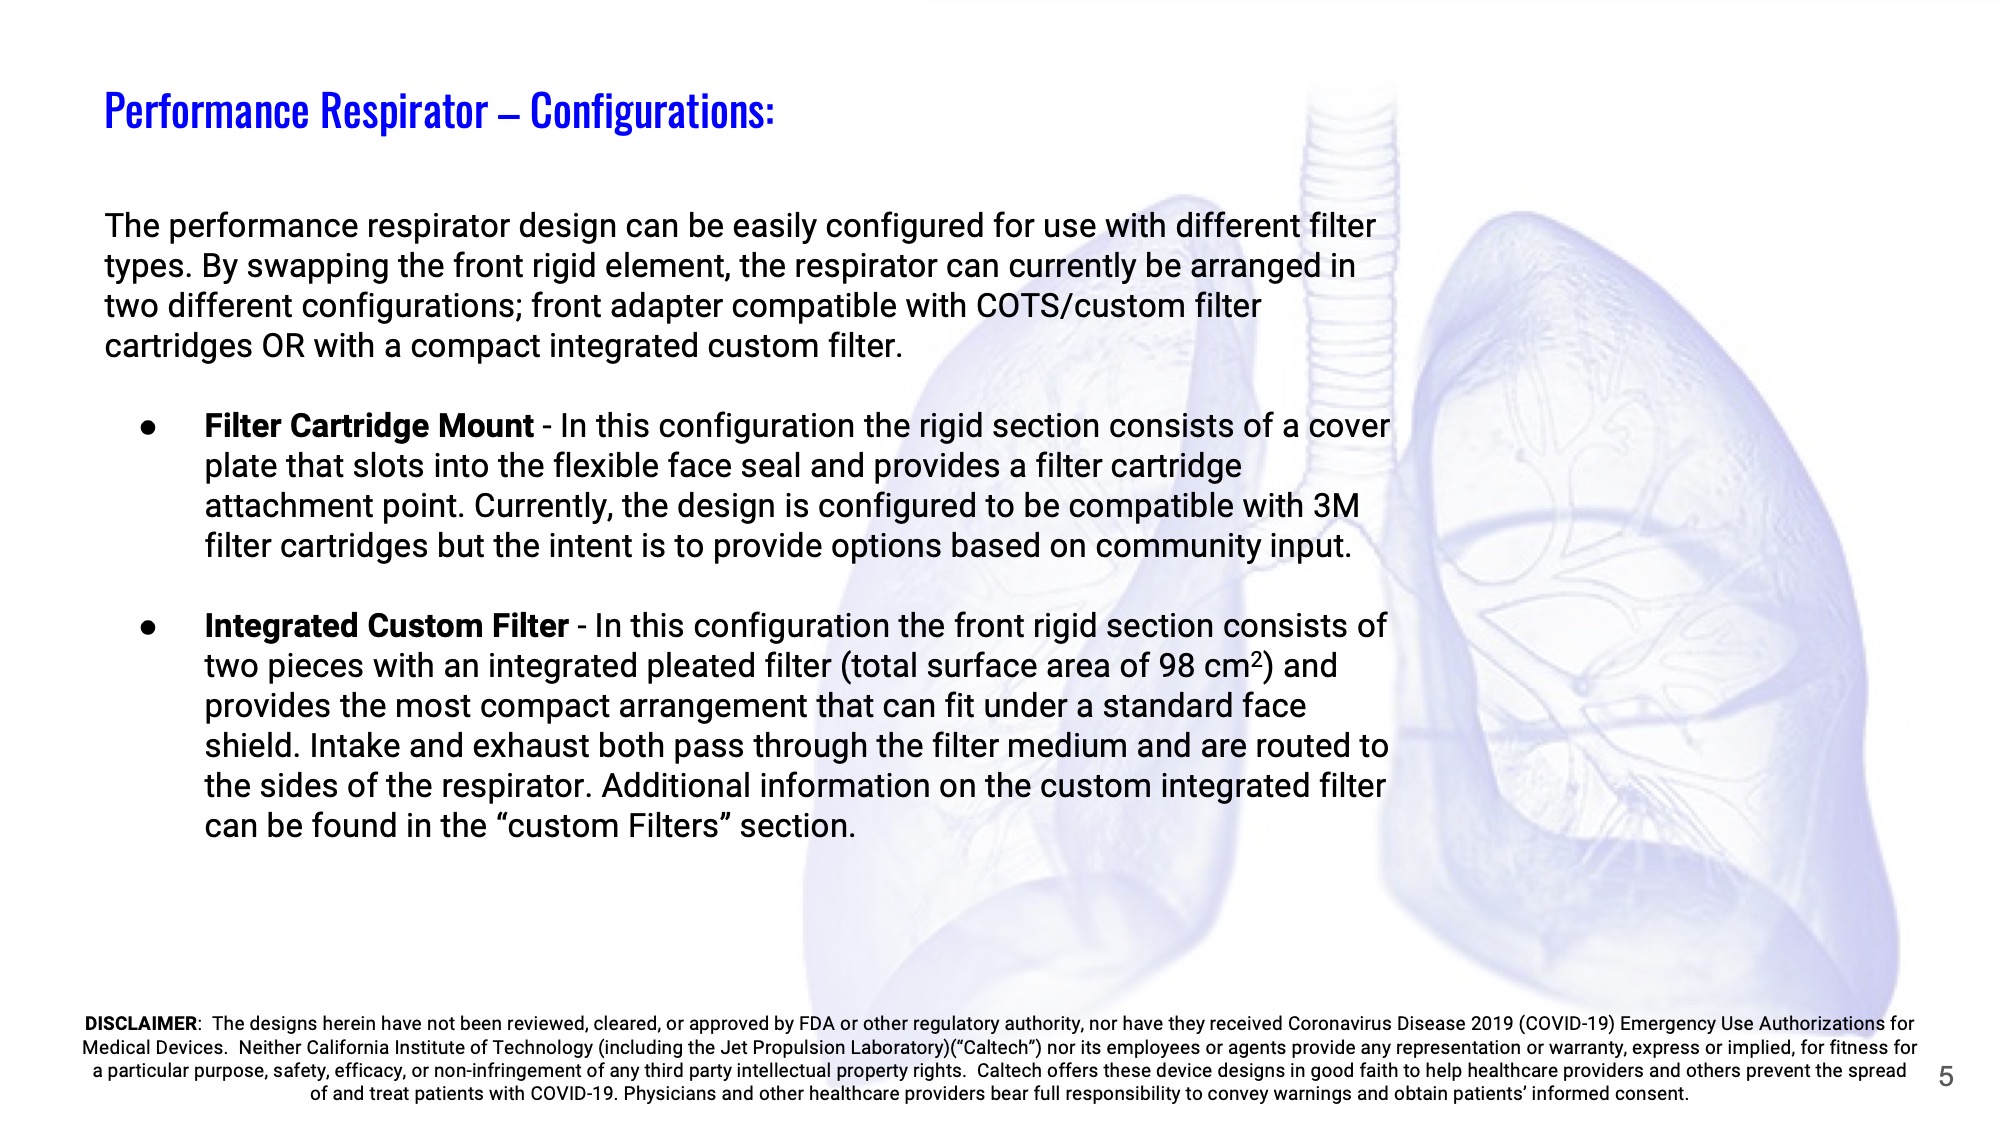 Slide 5: Performance Respirator – Configurations: The performance respirator design can be easily configured for use with different filter types. By swapping the front rigid element, the respirator can currently be arranged in two different configurations; front adapter compatible with COTS/custom filter cartridges OR with a compact integrated custom filter.  Filter Cartridge Mount - In this configuration the rigid section consists of a cover plate that slots into the flexible face seal and provides a filter cartridge attachment point. Currently, the design is configured to be compatible with 3M filter cartridges but the intent is to provide options based on community input.  Integrated Custom Filter - In this configuration the front rigid section consists of two pieces with an integrated pleated filter (total surface area of 98 cm2) and provides the most compact arrangement that can fit under a standard face shield. Intake and exhaust both pass through the filter medium and are routed to the sides of the respirator. Additional information on the custom integrated filter can be found in the “custom Filters” section.